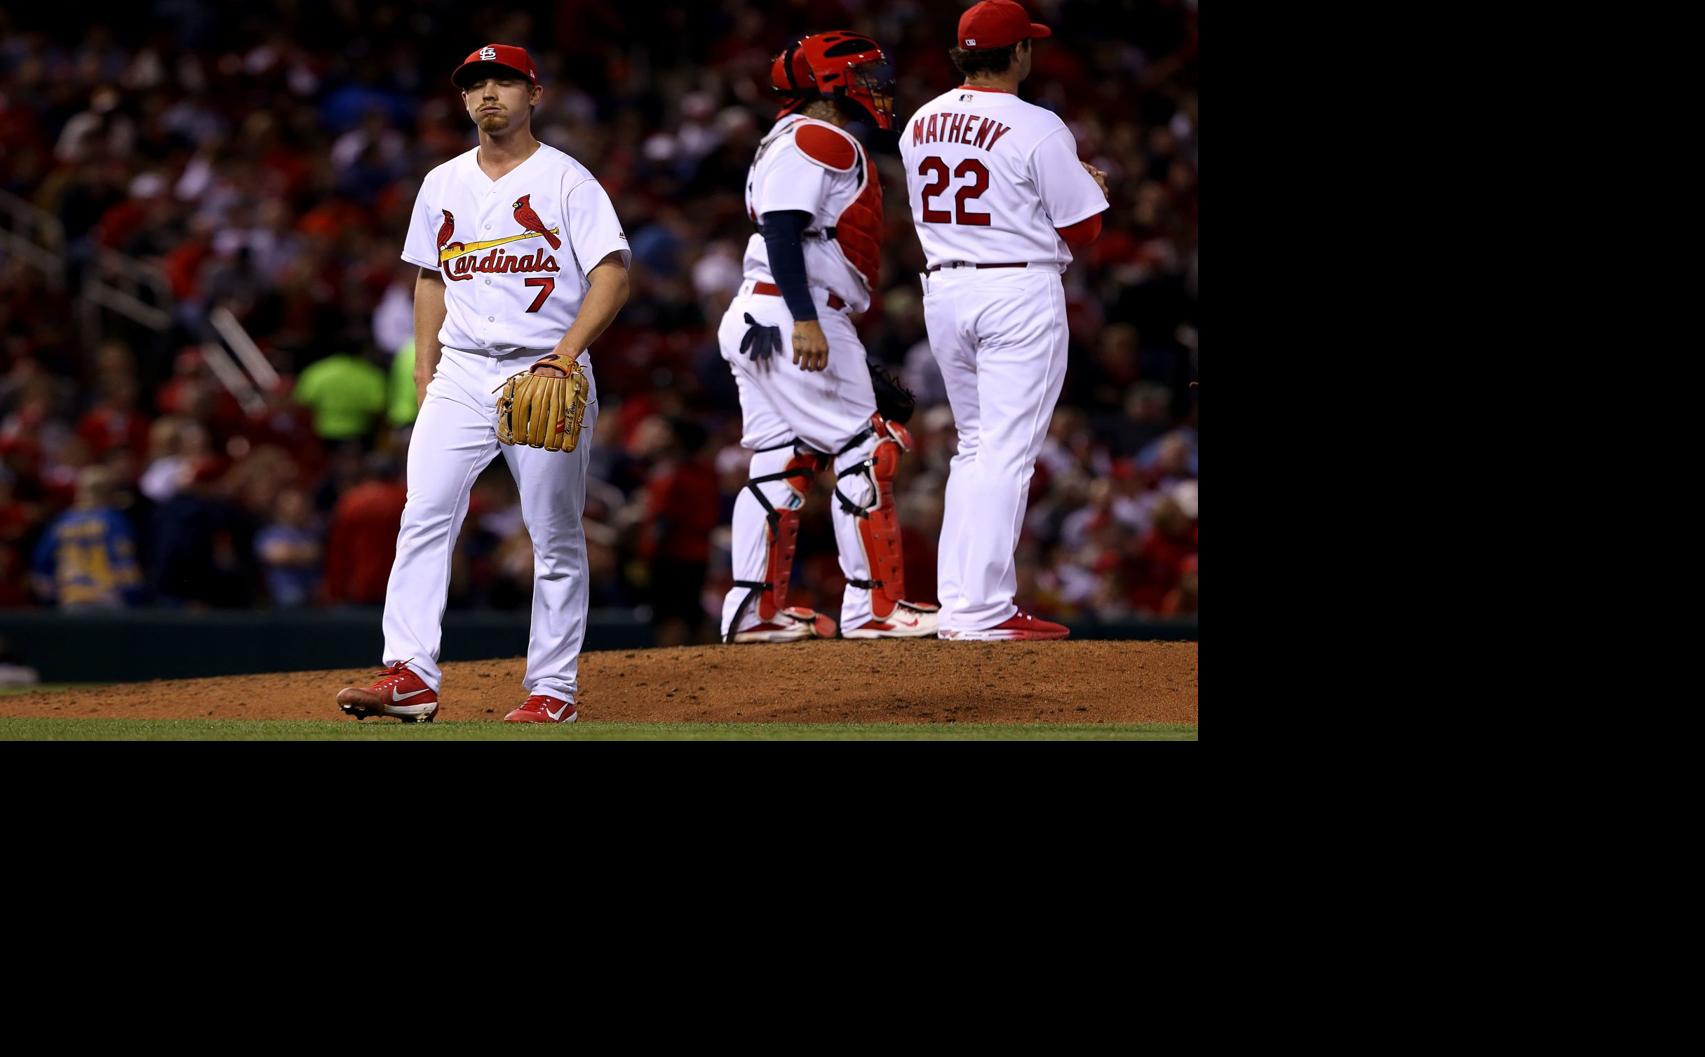 Reduced to challenging a home-run trot, Cardinals hand game over to Mets | St. Louis Cardinals ...